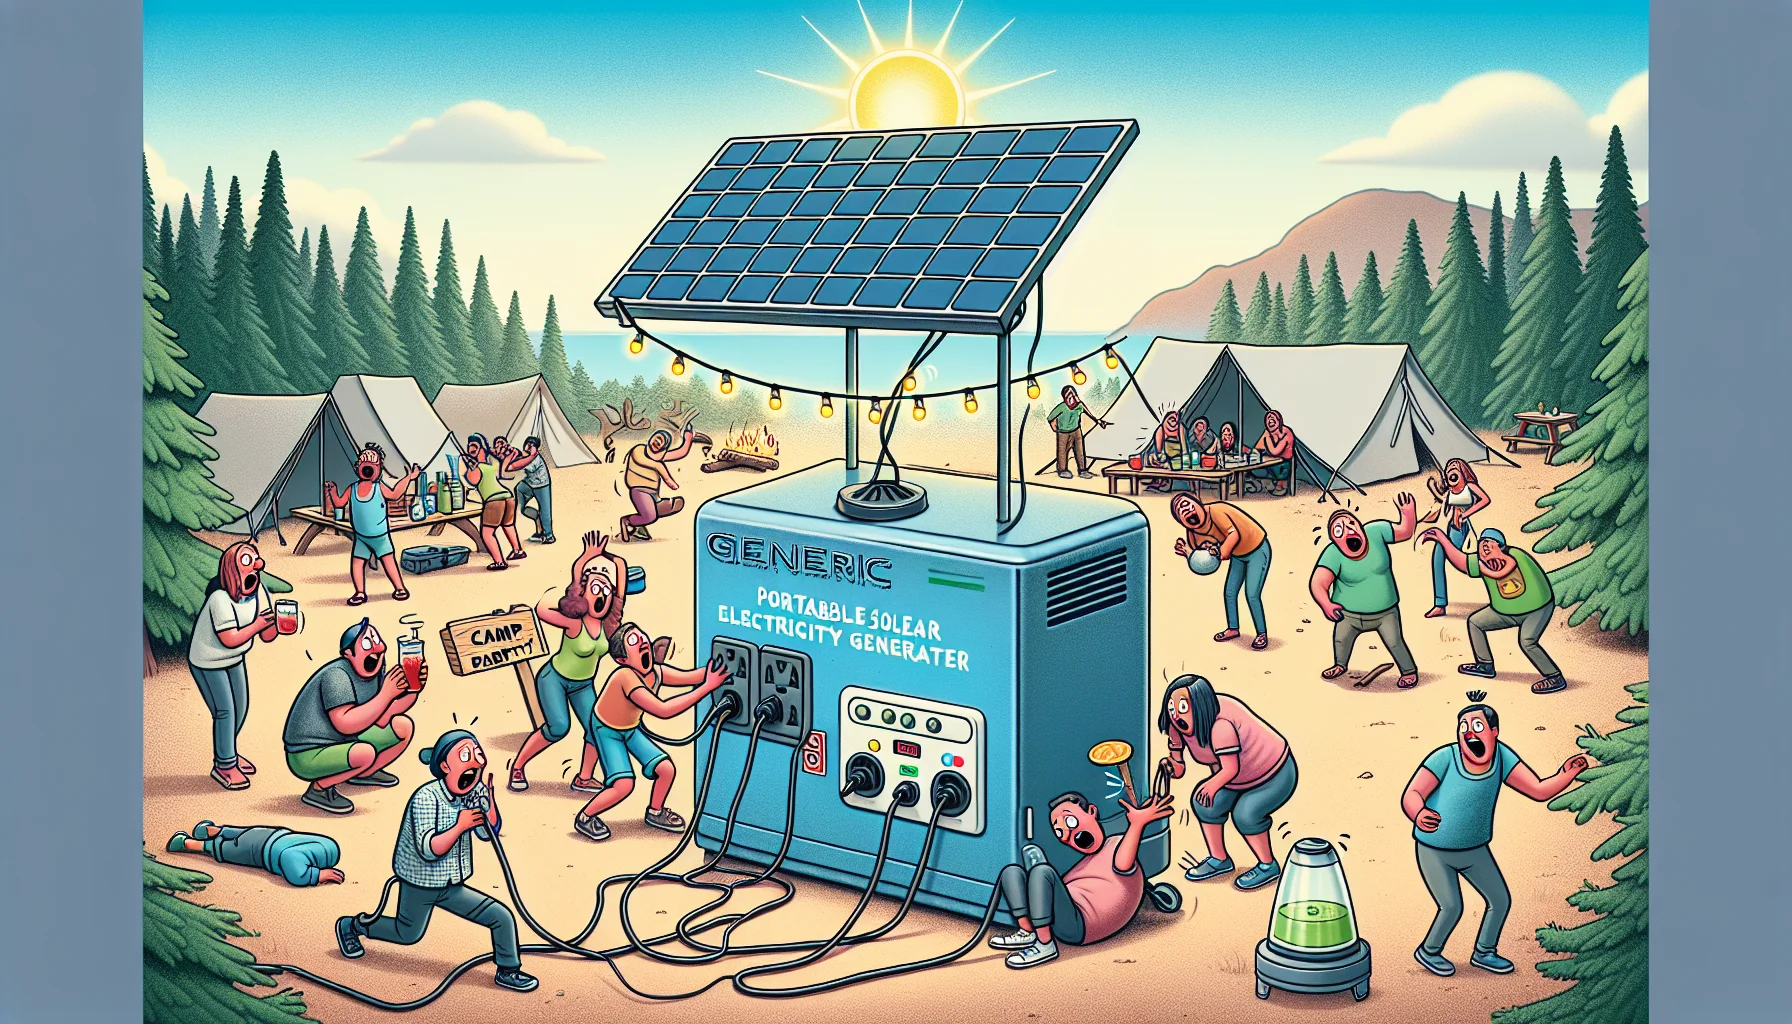 A comedic scene unfolding with a generic, portable solar electricity generator in the middle of a campsite. A gathering of people from various descents are being astounded by the solar generator's power output. They attempted to plug in a multitude of heavy electric appliances including a neon sign signifying 'Camp Party' and an oversized electric blender for making smoothies. Their reactions are priceless, some in surprise, others in laughter. Outside, it's a bright sunny day with the sun rays efficiently captured by the generator's panels. This scene subtly encourages the use of solar generated electricity.